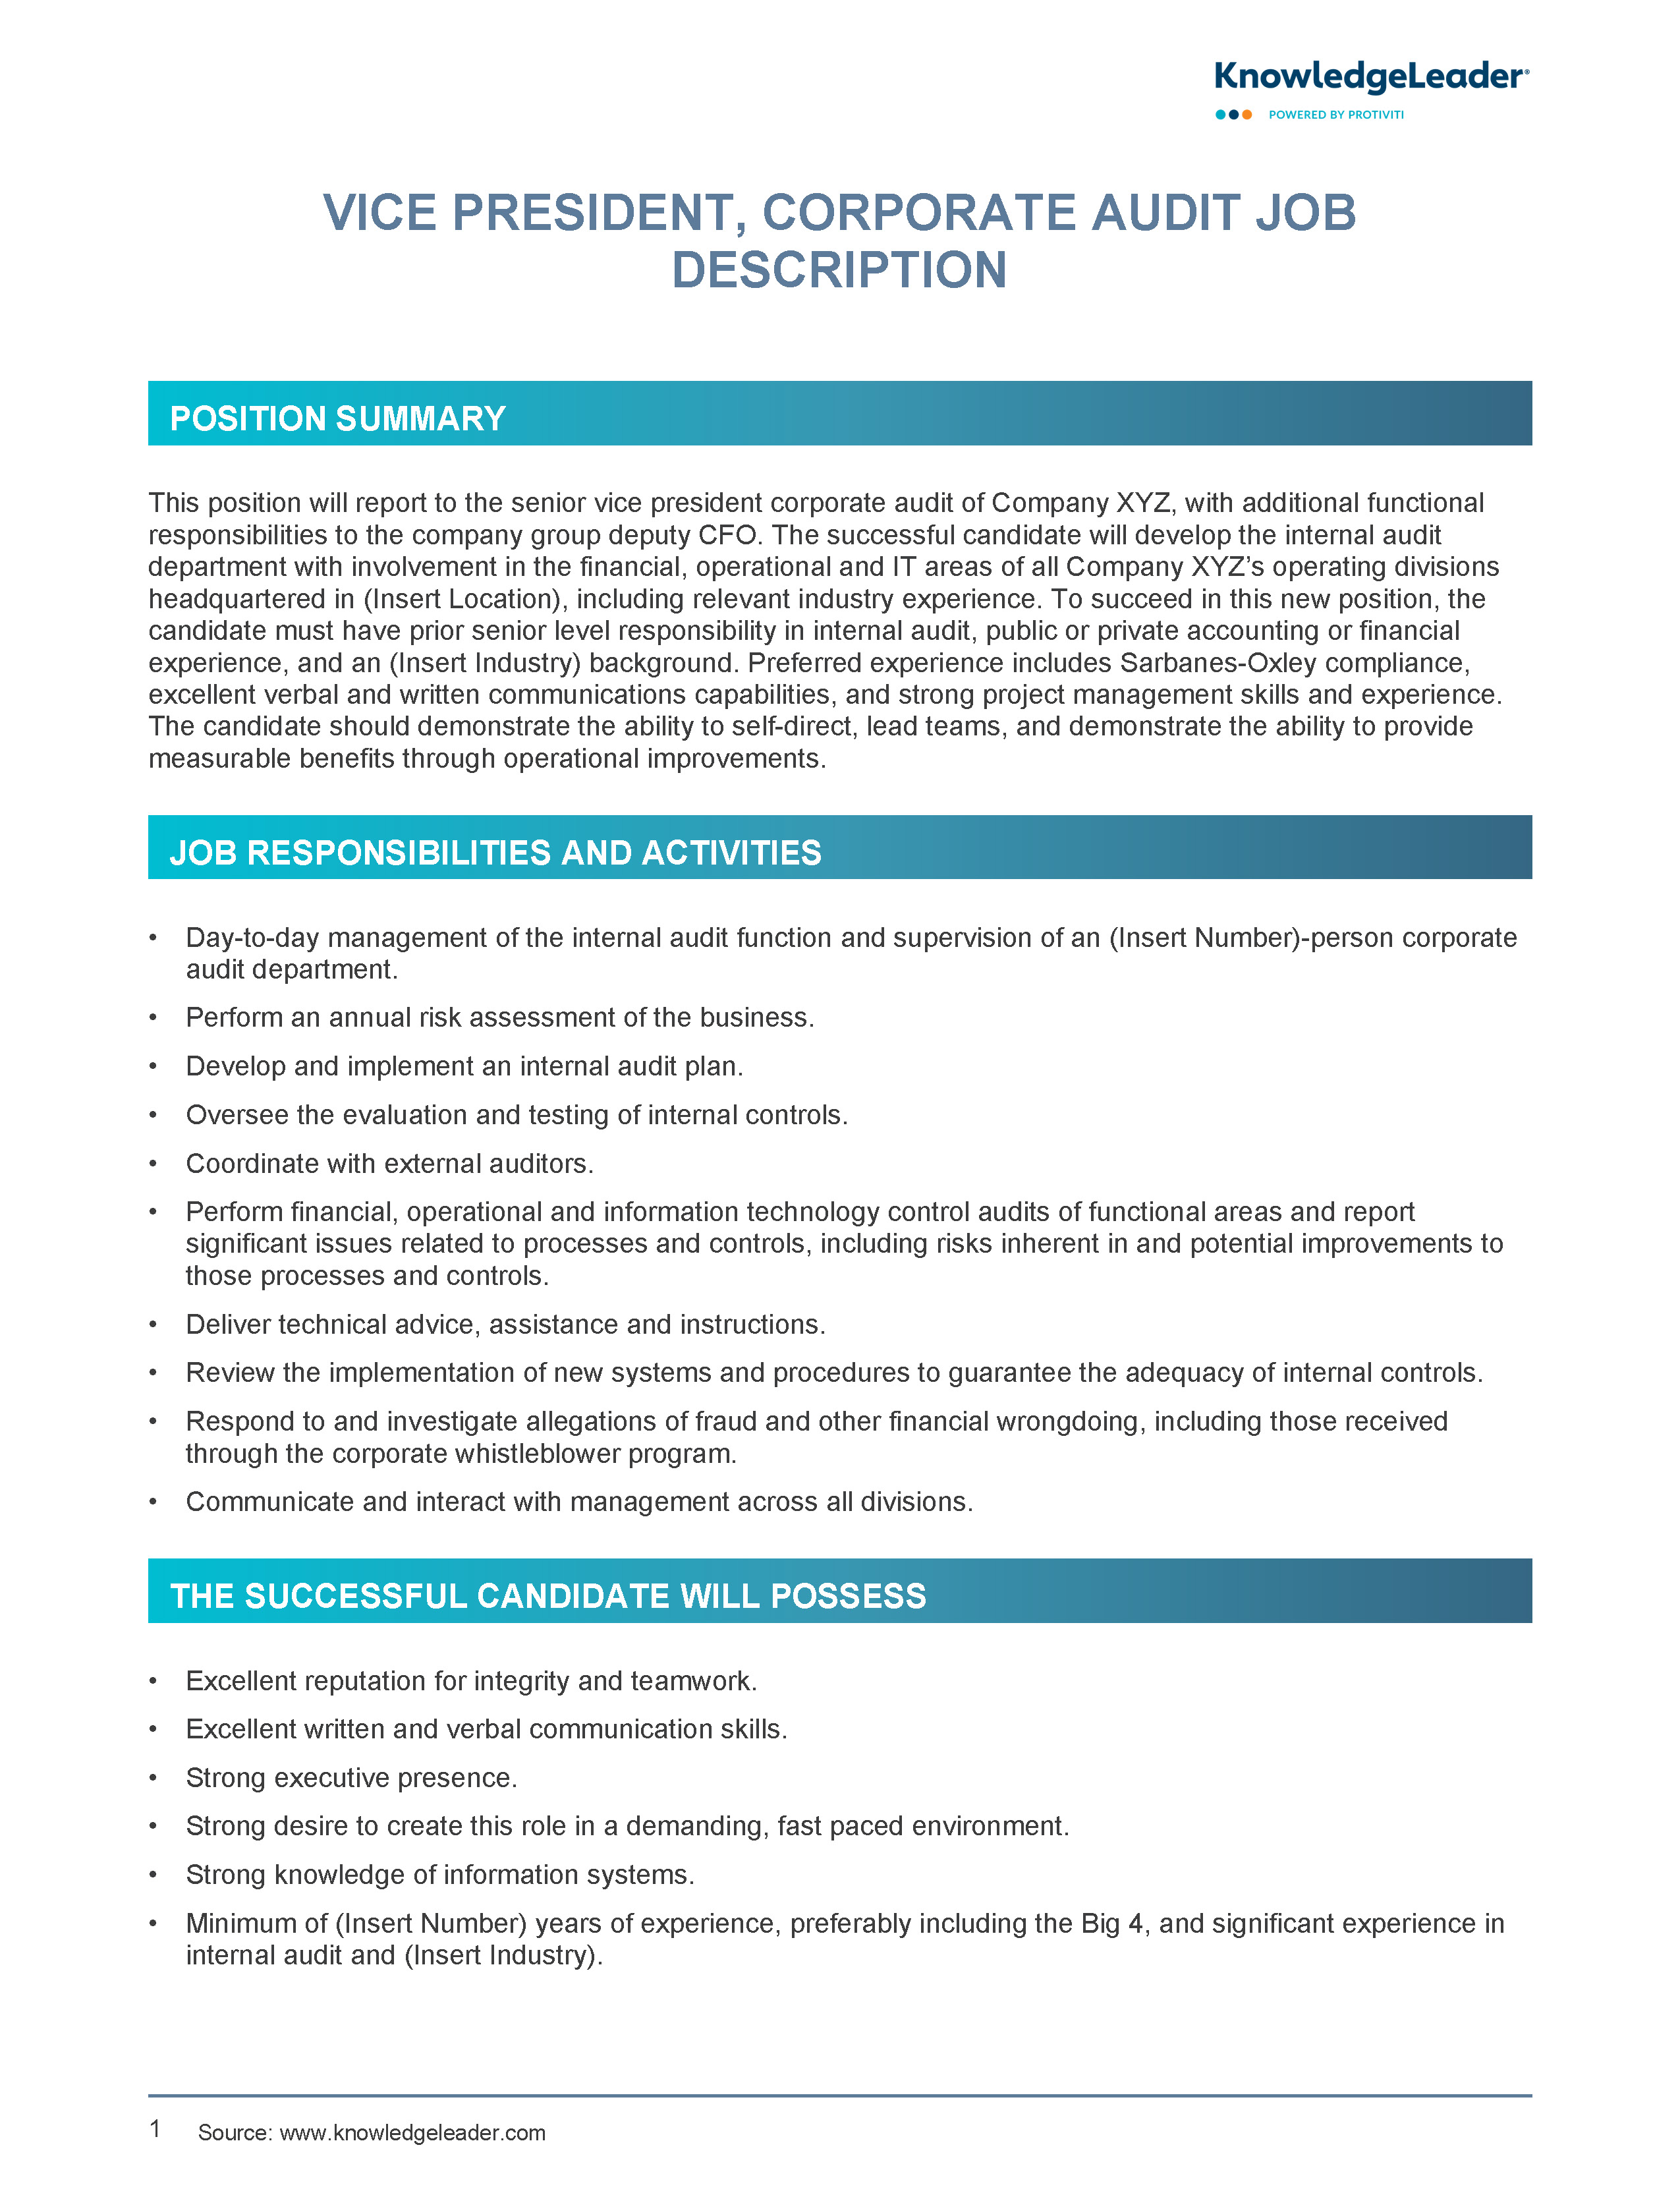 Screenshot of the first page of VP Corporate Audit Job Description